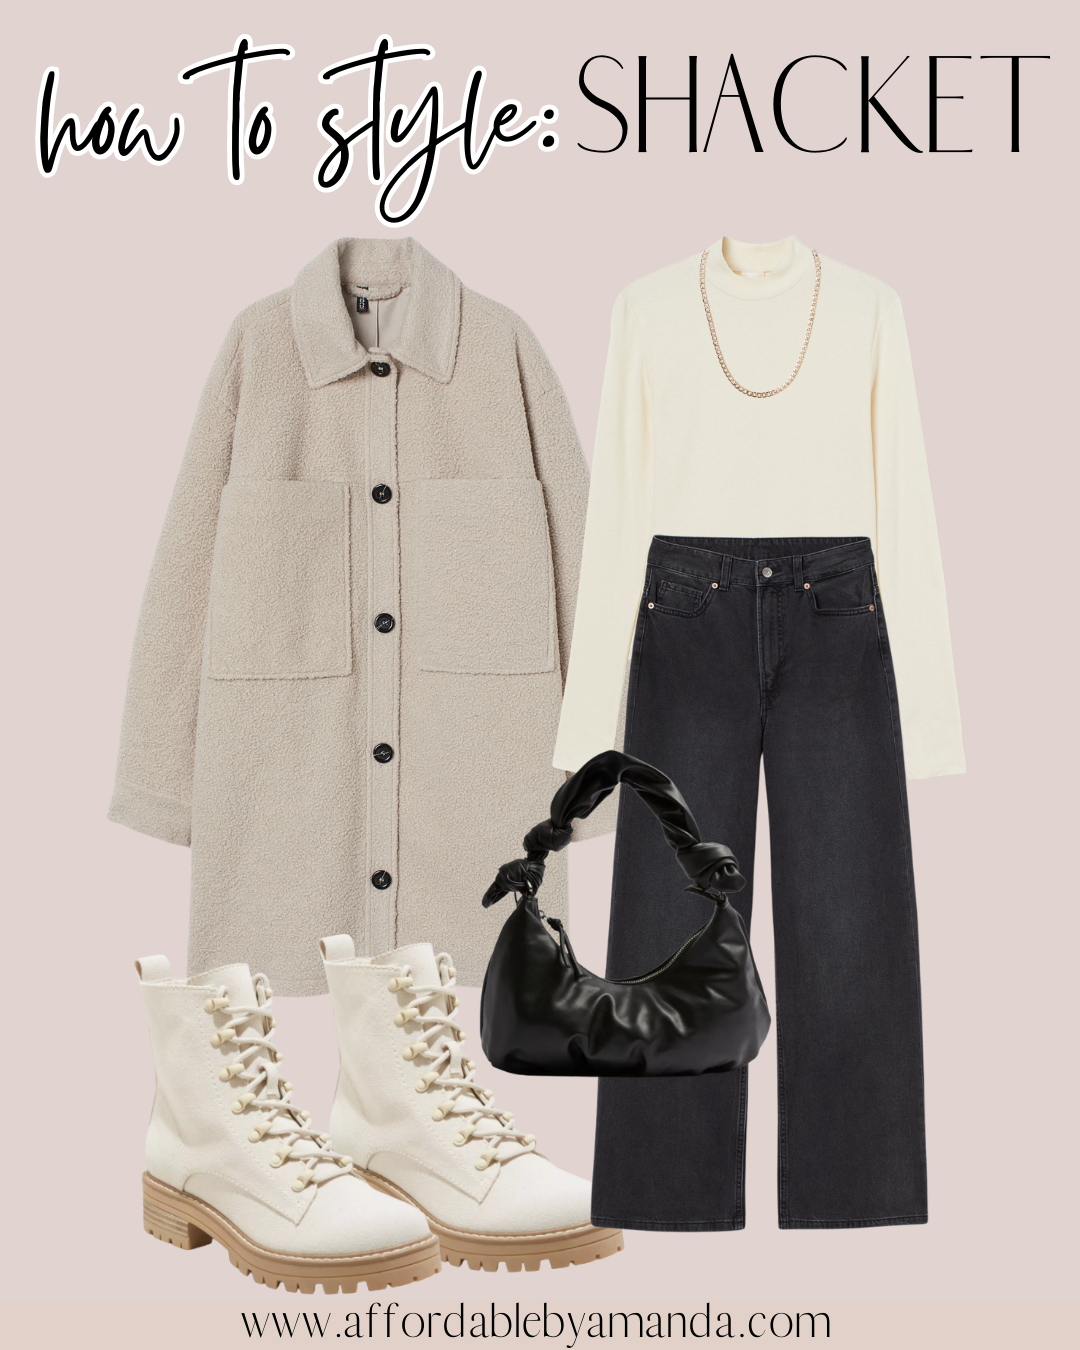 Oversized Shirt Jacket, Black Wide-Leg Denim Jeans, Parker Lace Up Boots | Affordable by Amanda | How to Wear Shackets